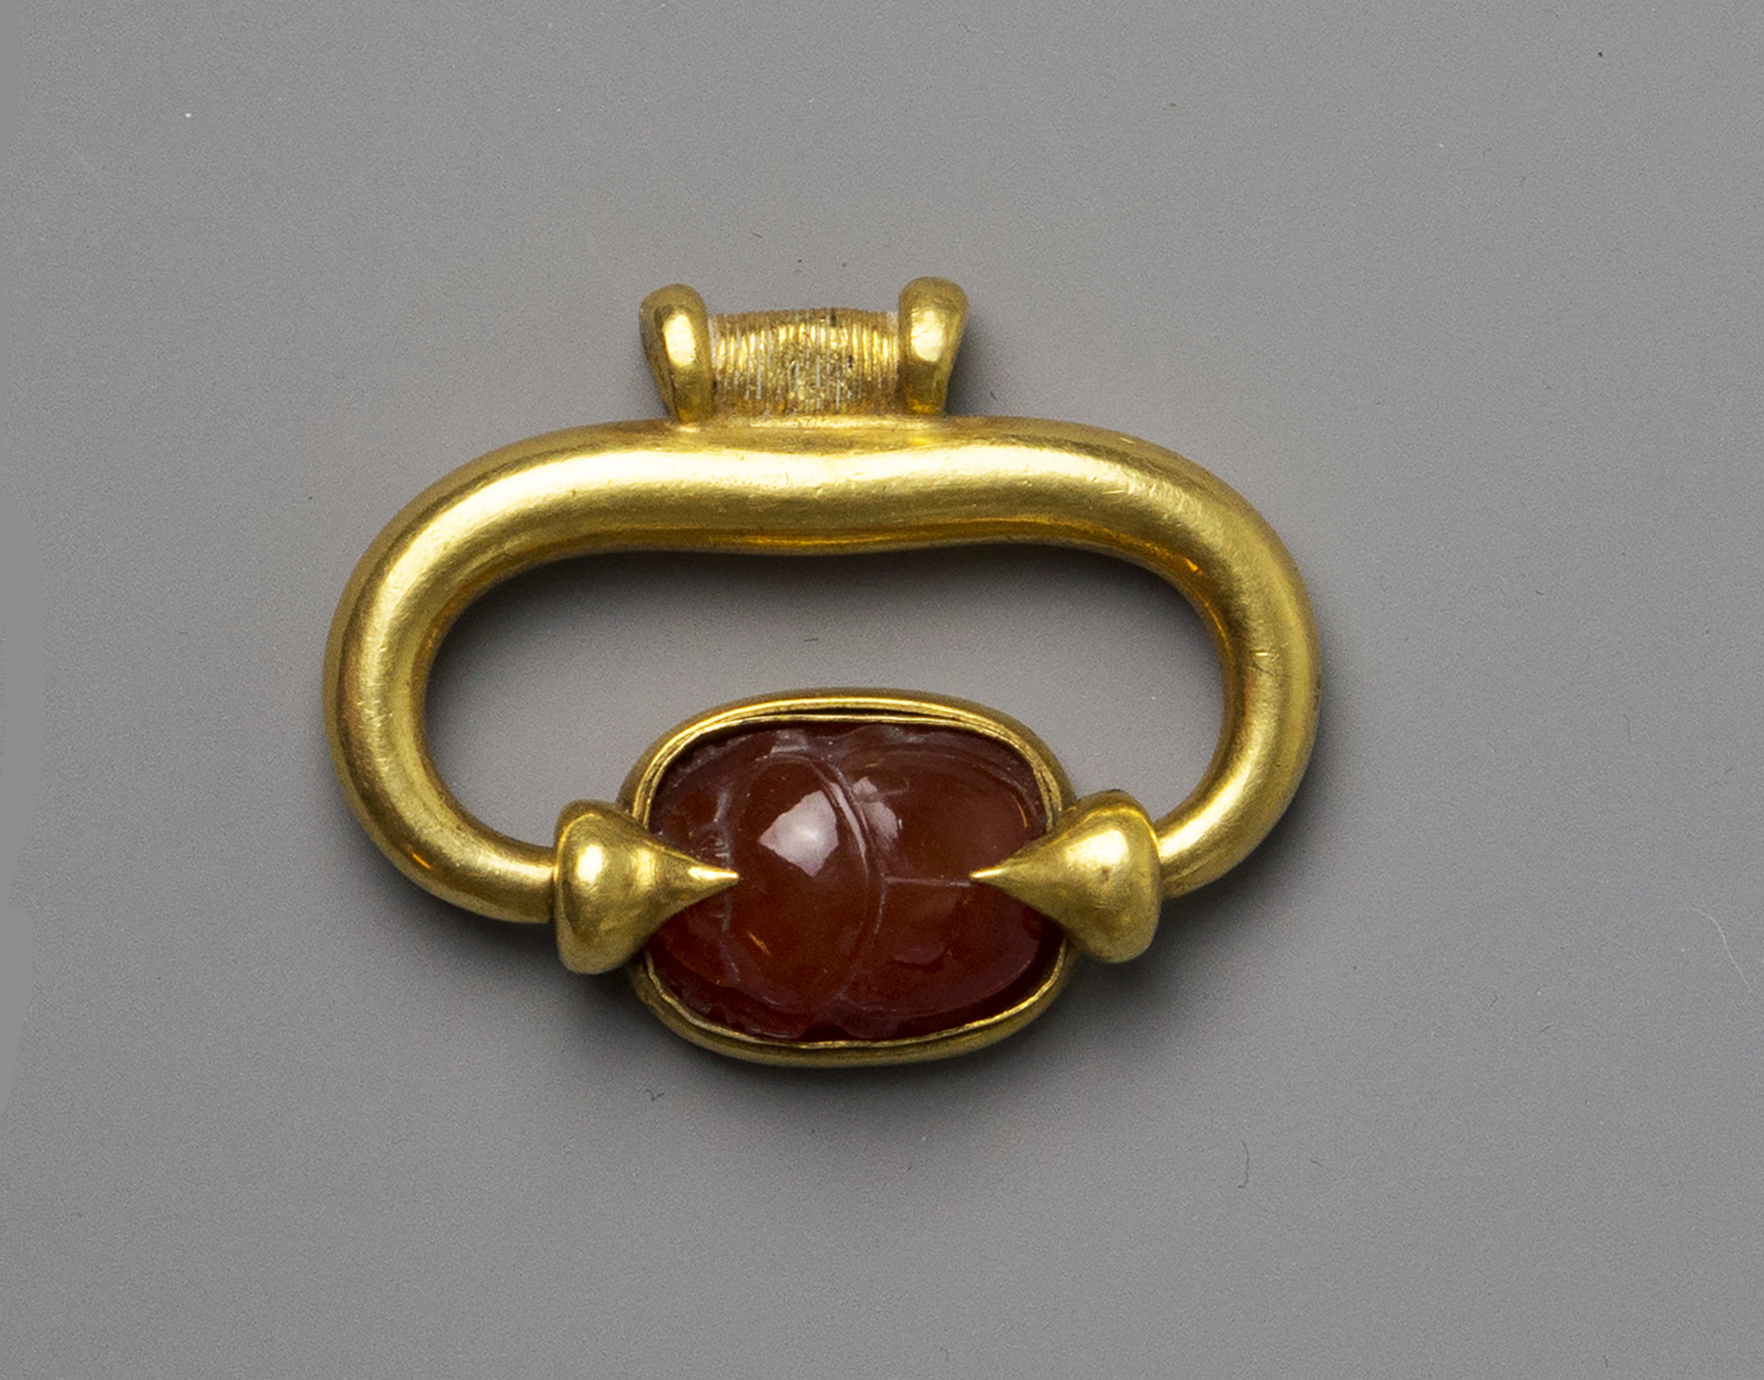 Gold pendant ring with carnelian scaraboid | Cypriot | Classical | The ...